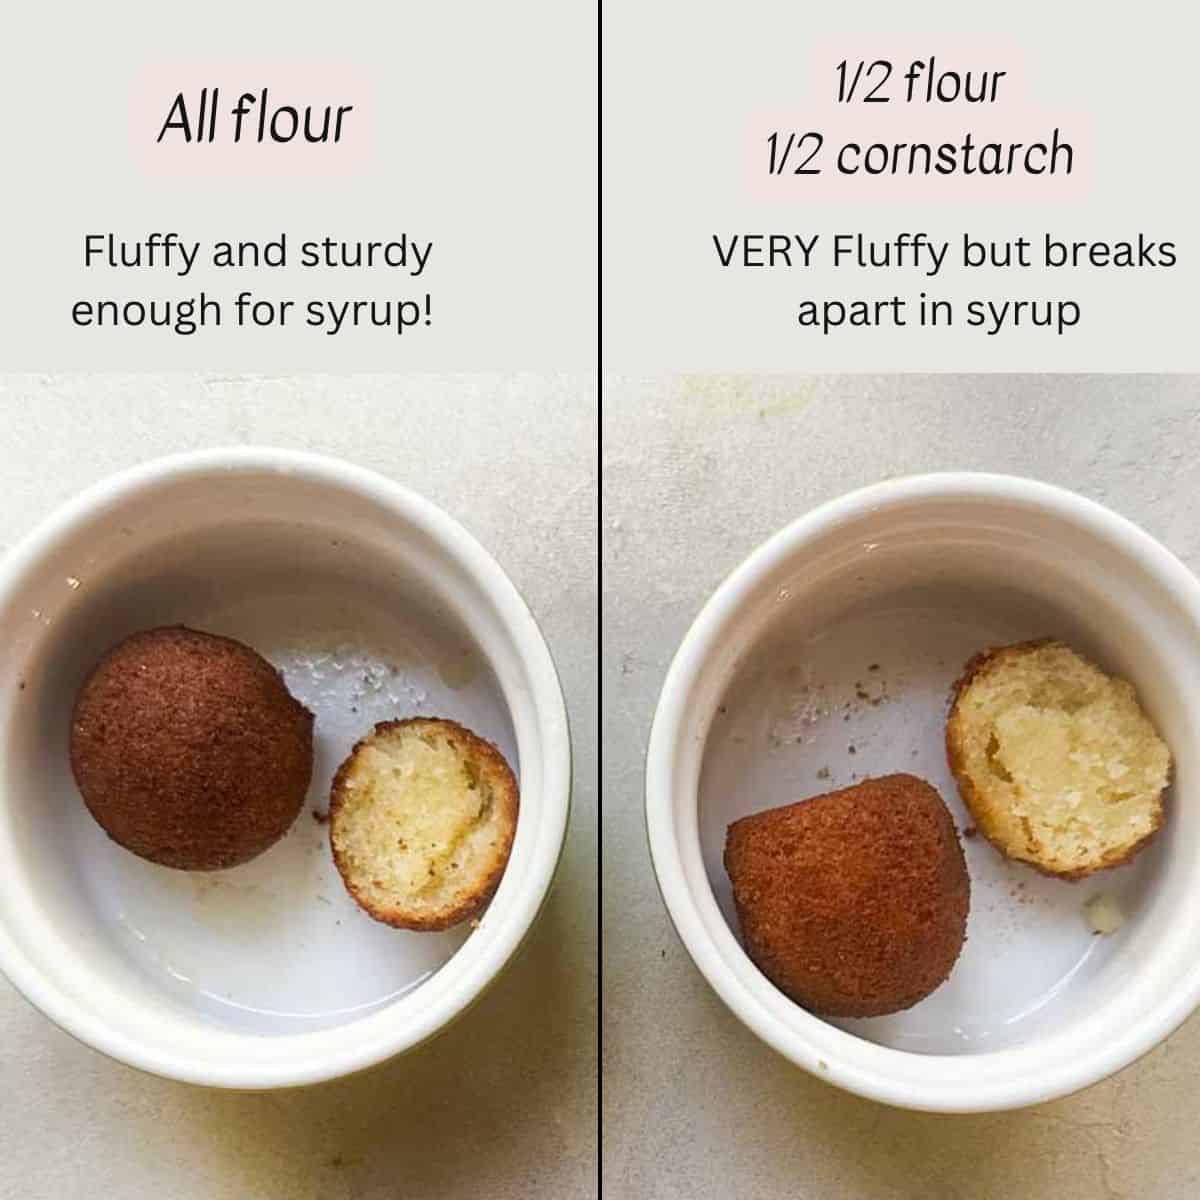 Infographic of gulab jamun made with only flour (left) and gulab jamun made with half flour and half cornstarch (right). The graphic shows that both jamuns are fluffy but the one with cornstarch is fluffier although less stable to withstanding soaking in syrup.